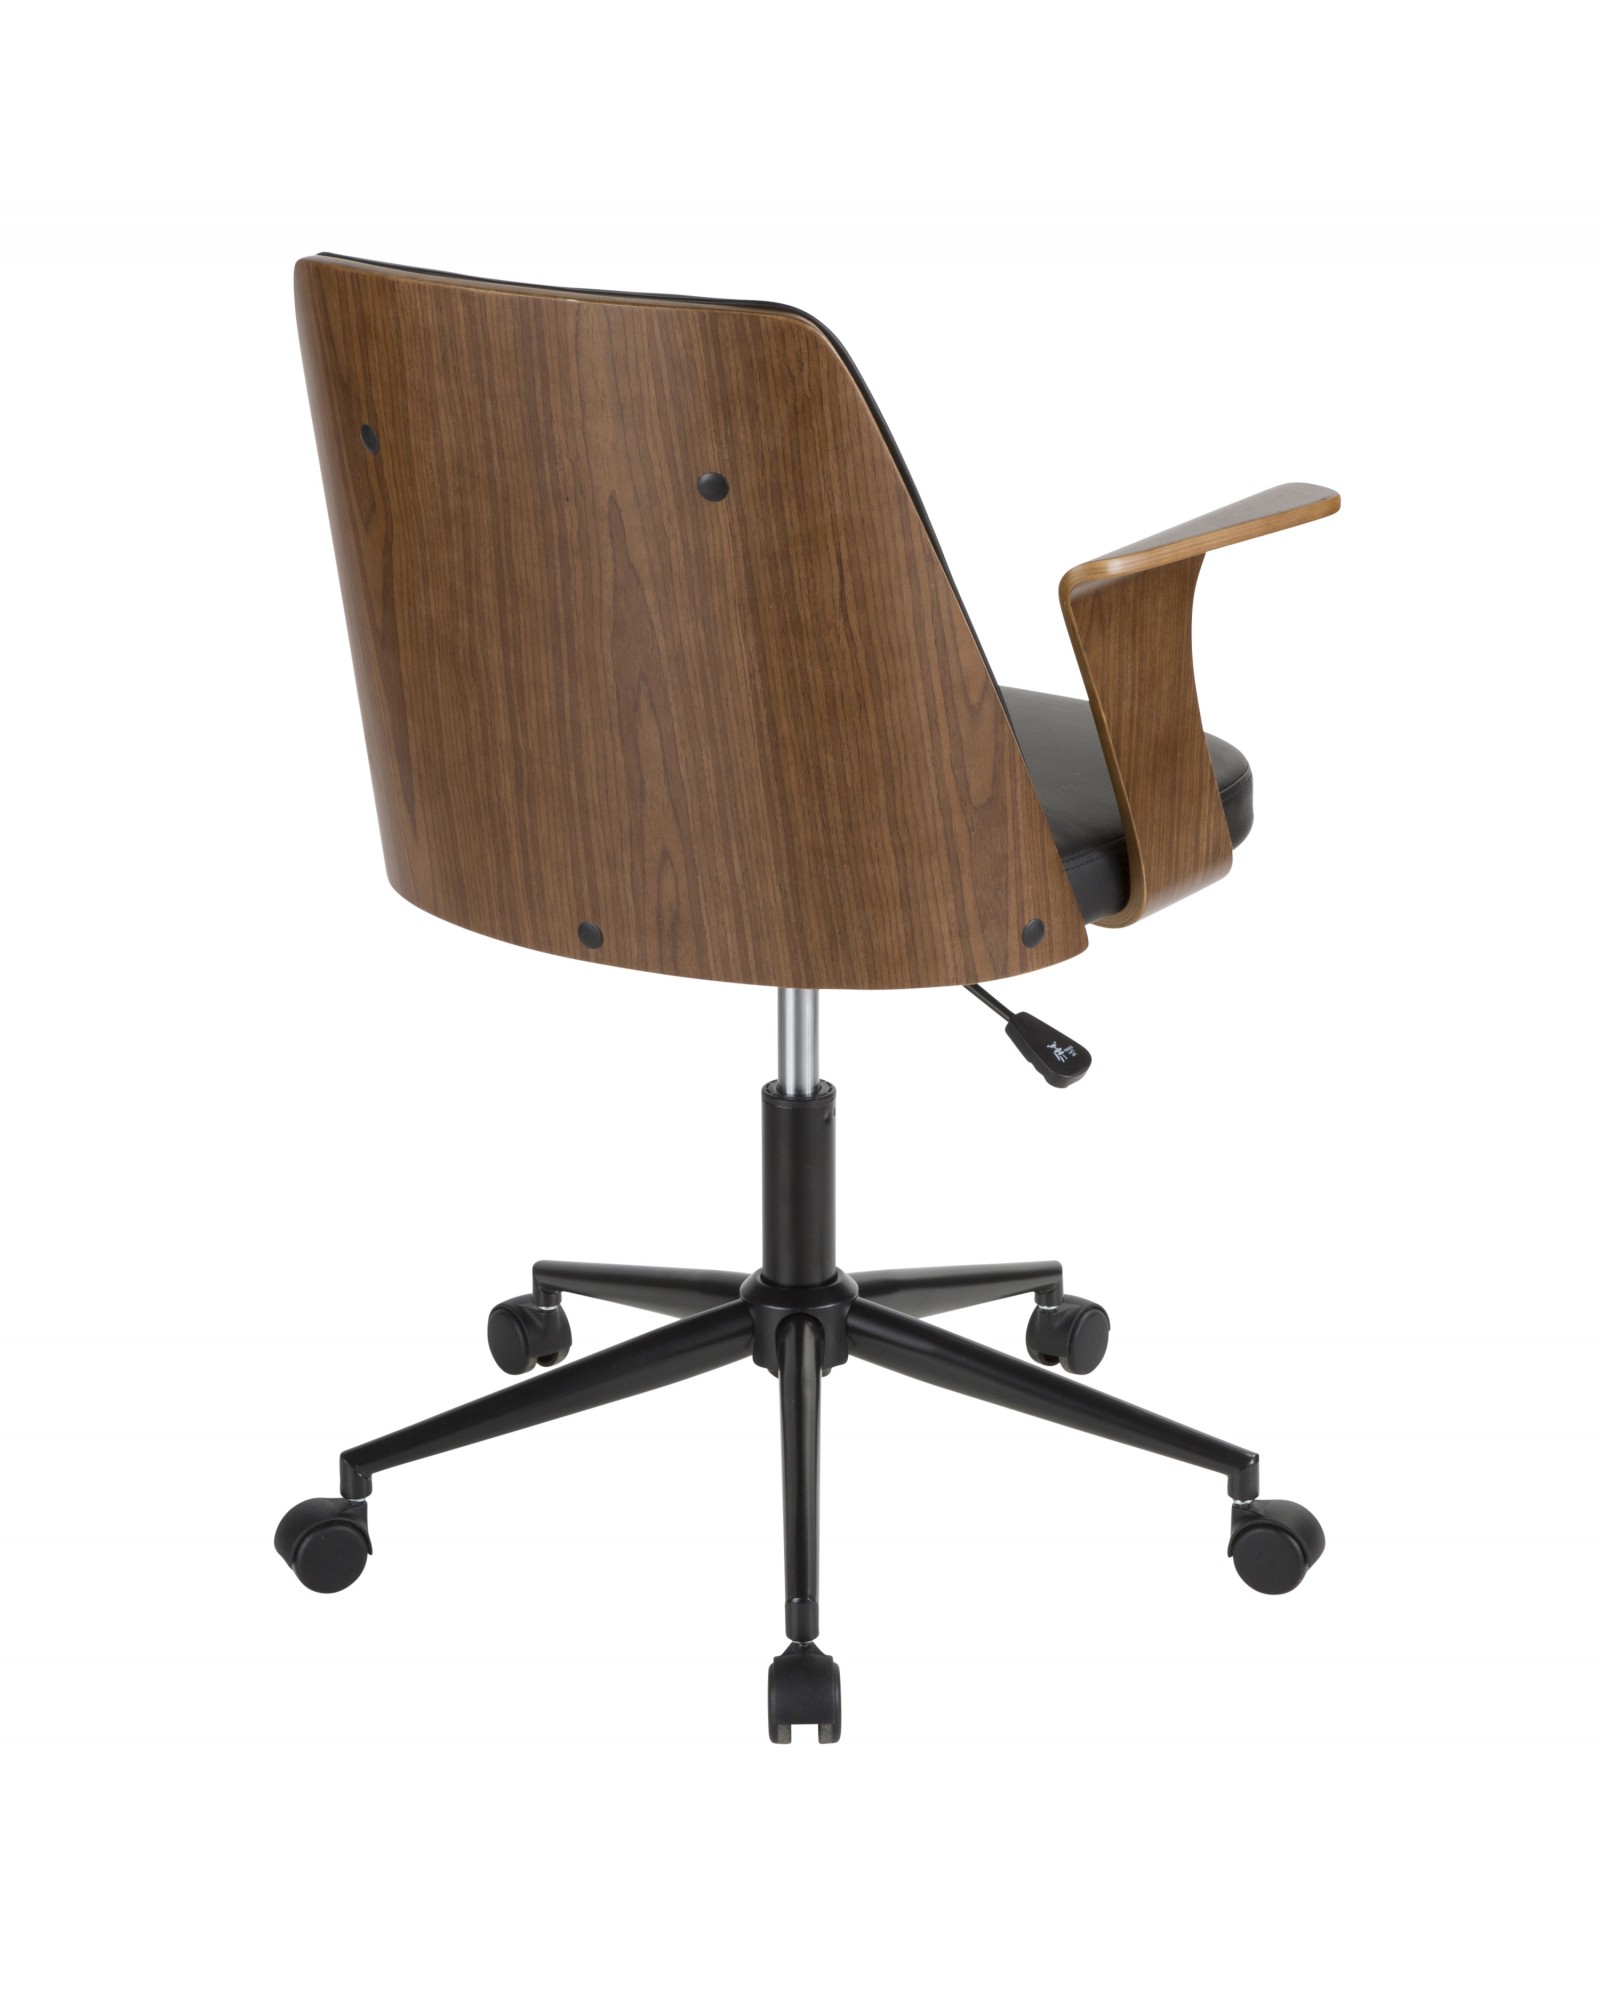 Verdana Mid-Century Modern Office Chair in Walnut Wood and Black Faux Leather